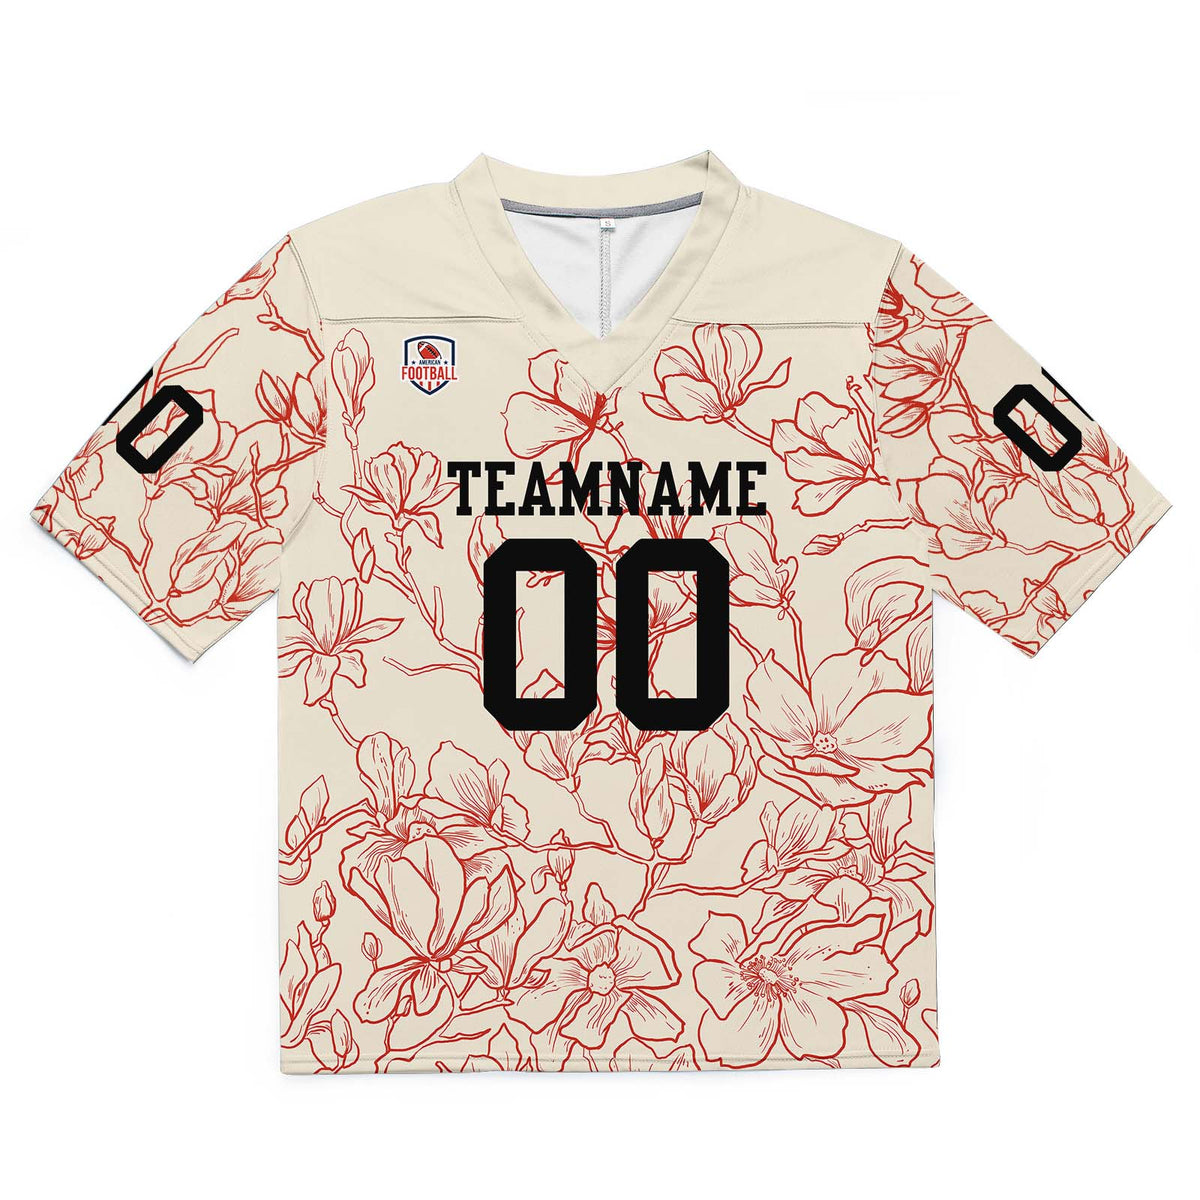 Custom Football Jersey Shirt Personalized Stitched Printed Team Name Number Cream&Red